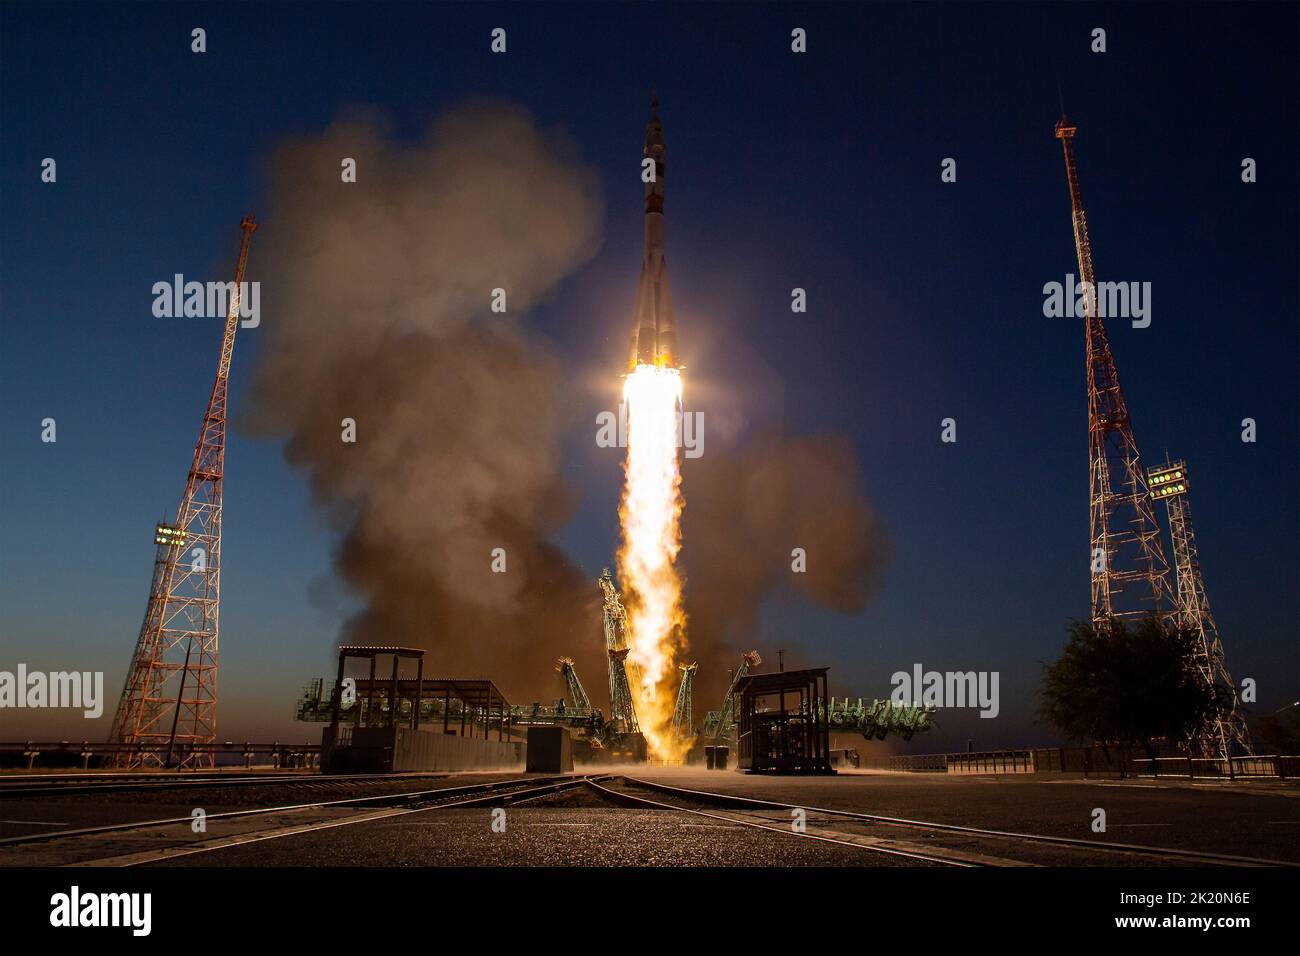 Baikonur, Kazakhstan. 21st Sep, 2022. The Russian Soyuz MS-22 spacecraft and booster rocket blasts off from launch pad 31 of the Baikonur Cosmodrome, September 21, 2022 in Baikonur, Kazakhstan. International Space Station Expedition 68 crew members astronaut Frank Rubio of NASA, and cosmonauts Sergey Prokopyev and Dmitri Petelin of Roscosmos will spend six months on the orbital complex, returning to Earth in March 2023. Credit: Bill Ingalls/NASA/Alamy Live News Stock Photo